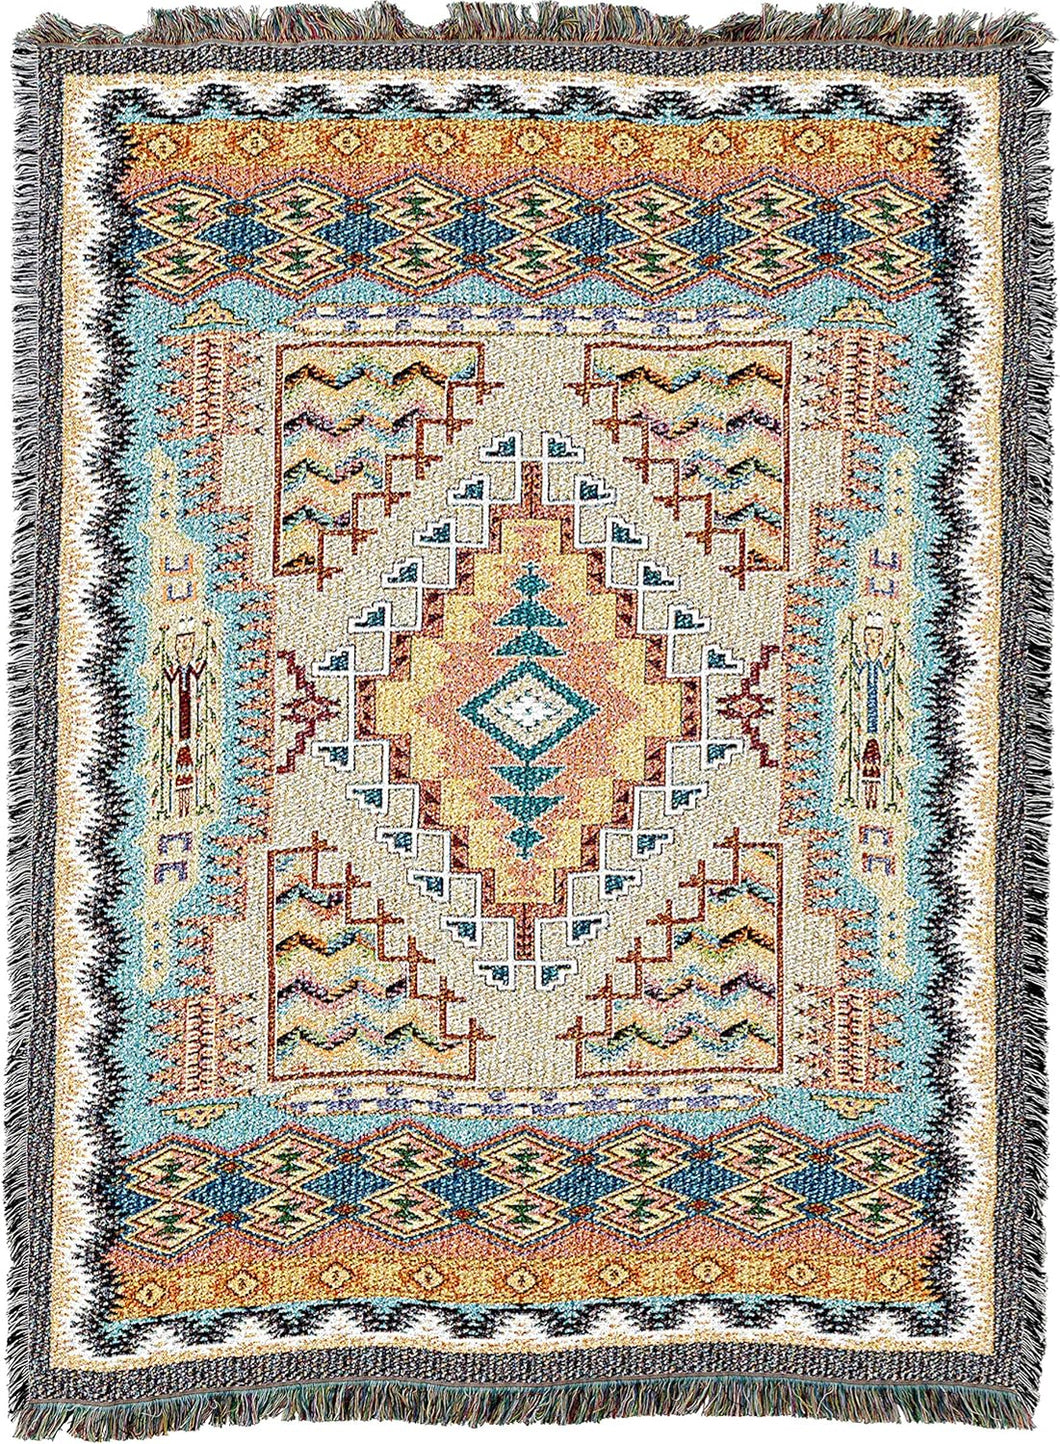 Painted Hills Turquoise Throw Blanket